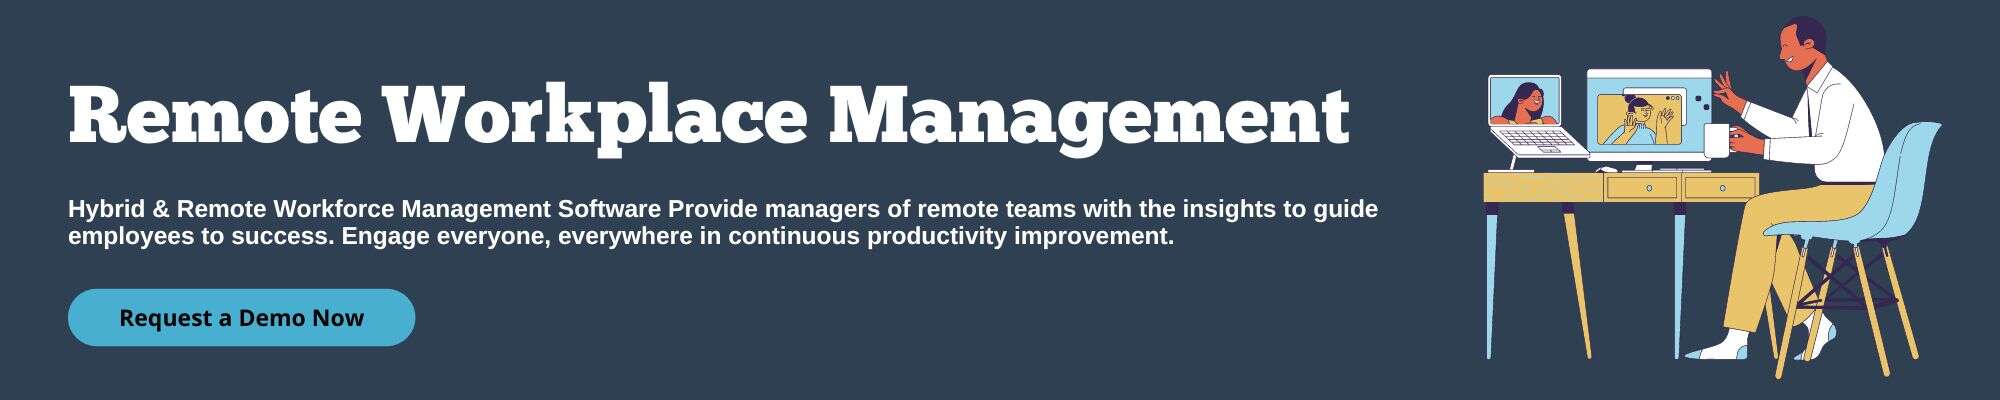 remote workplace management